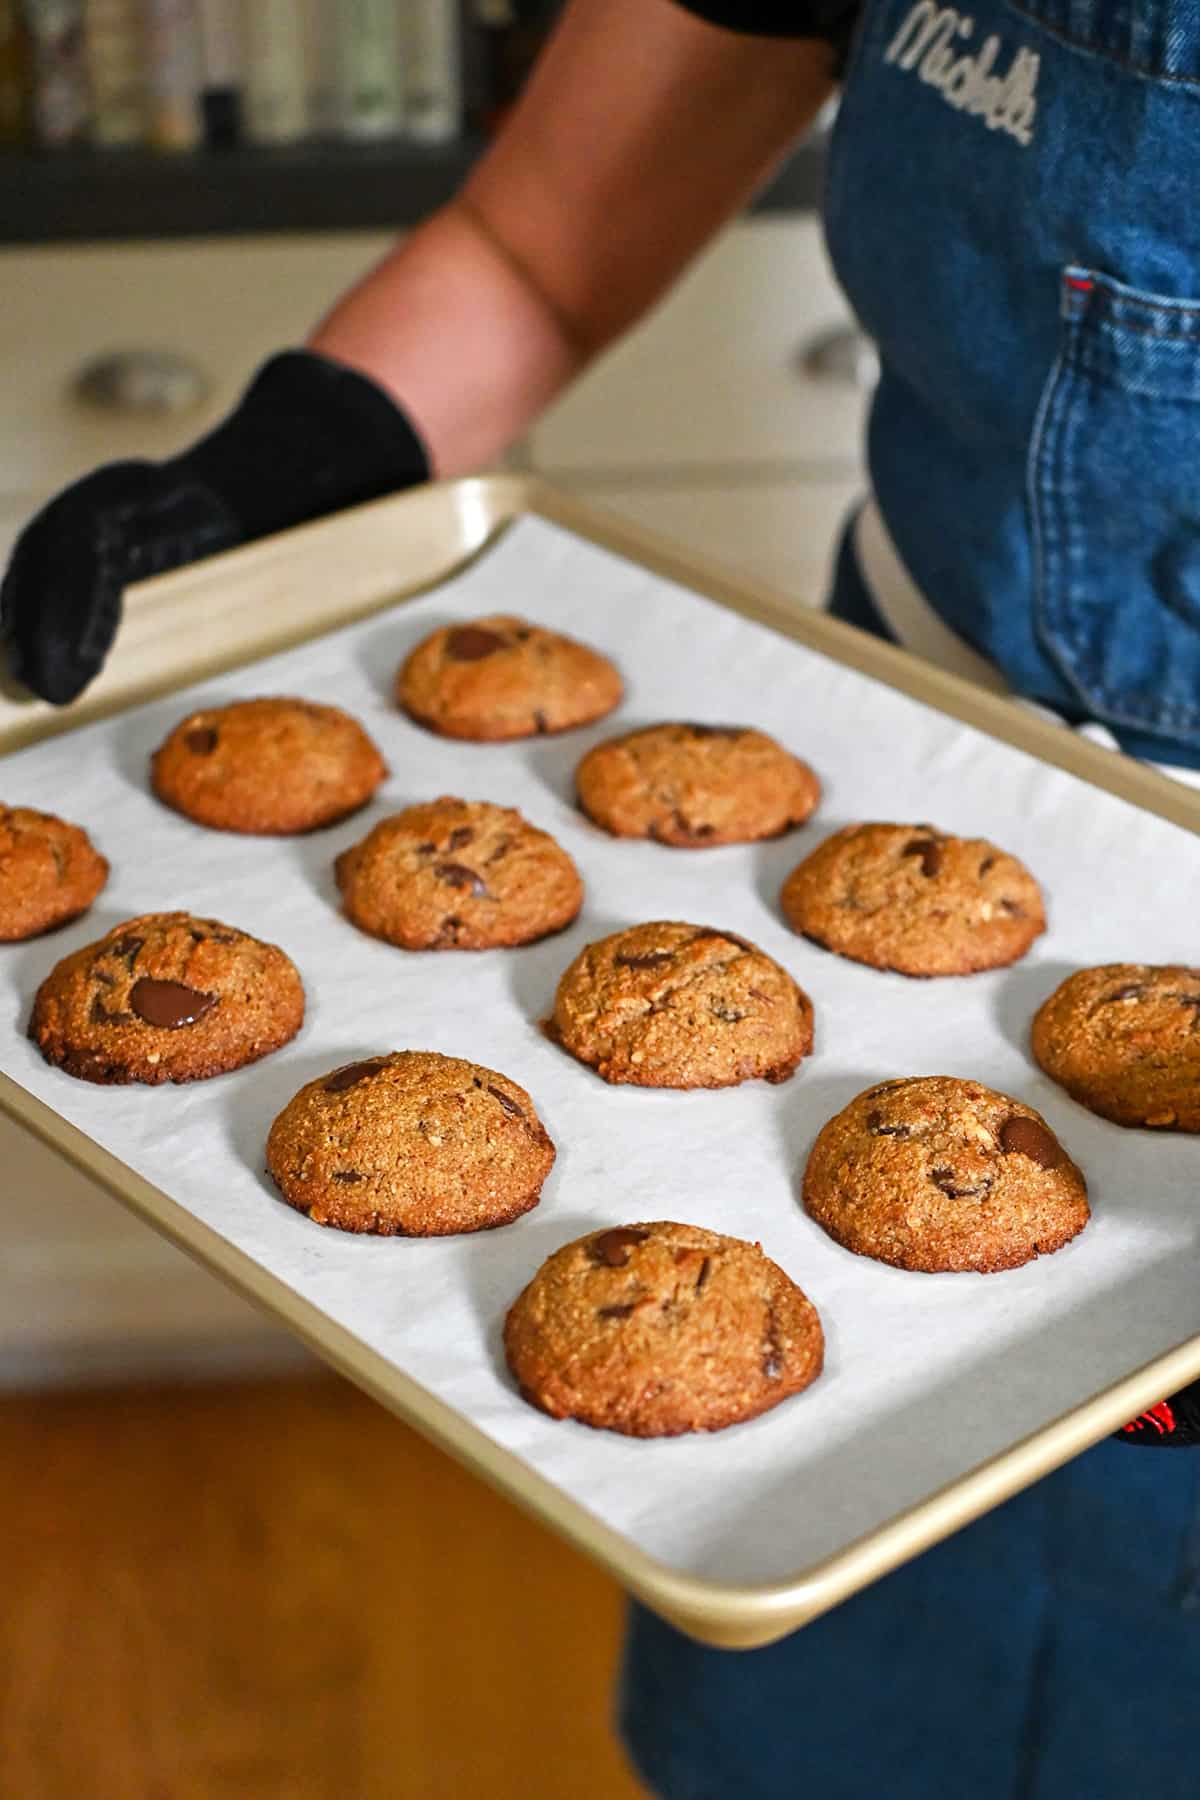 A person is holding a tray of freshly baked paleo banana chocolate chip cookies right out of the oven.